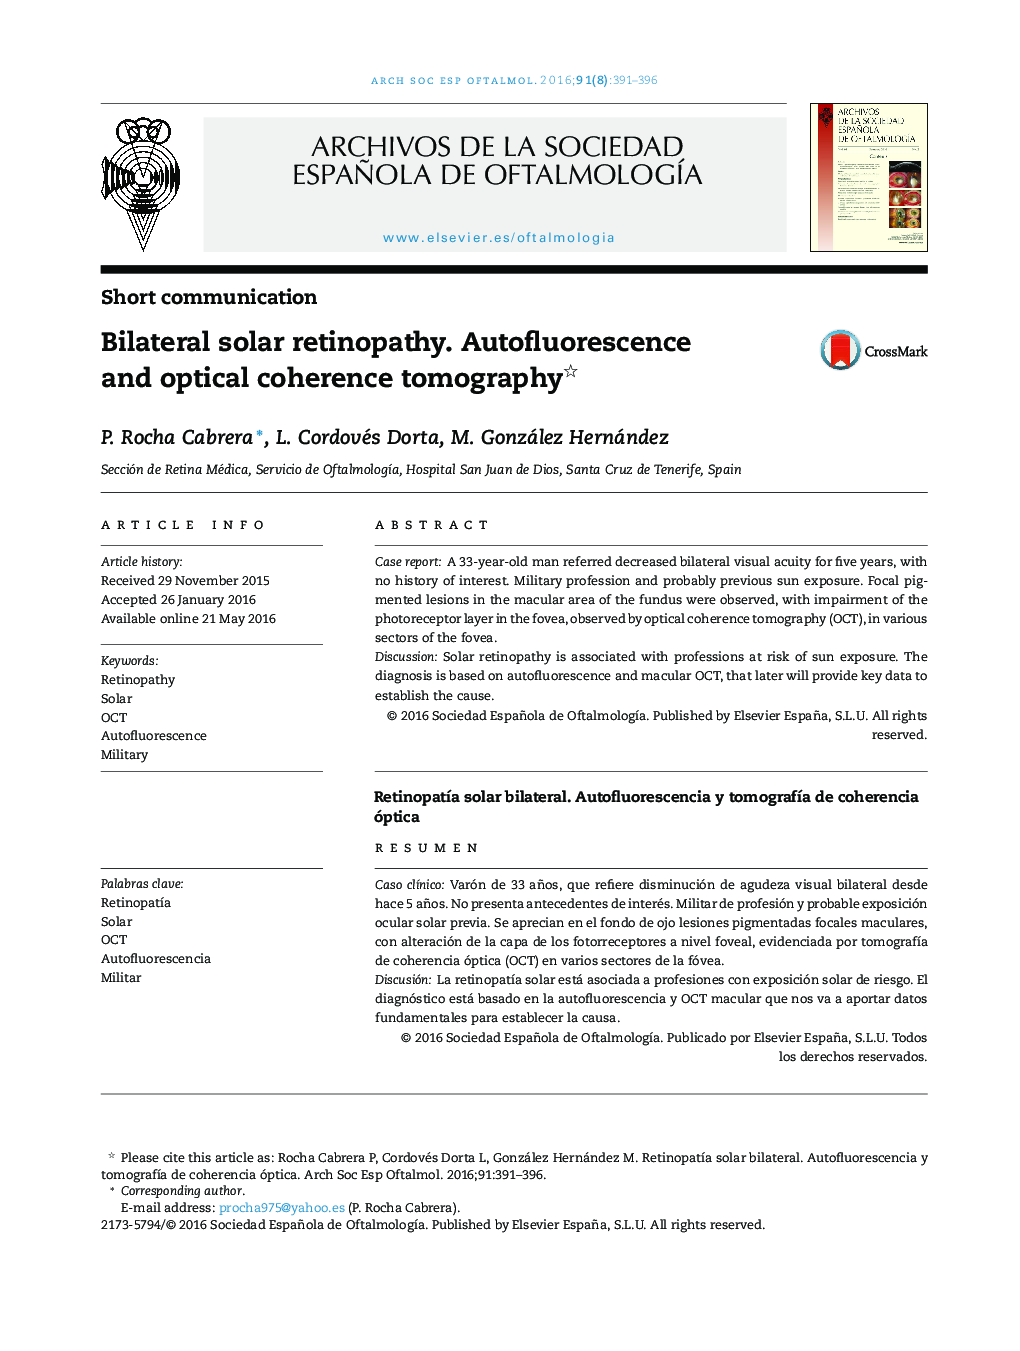 Bilateral solar retinopathy. Autofluorescence and optical coherence tomography 